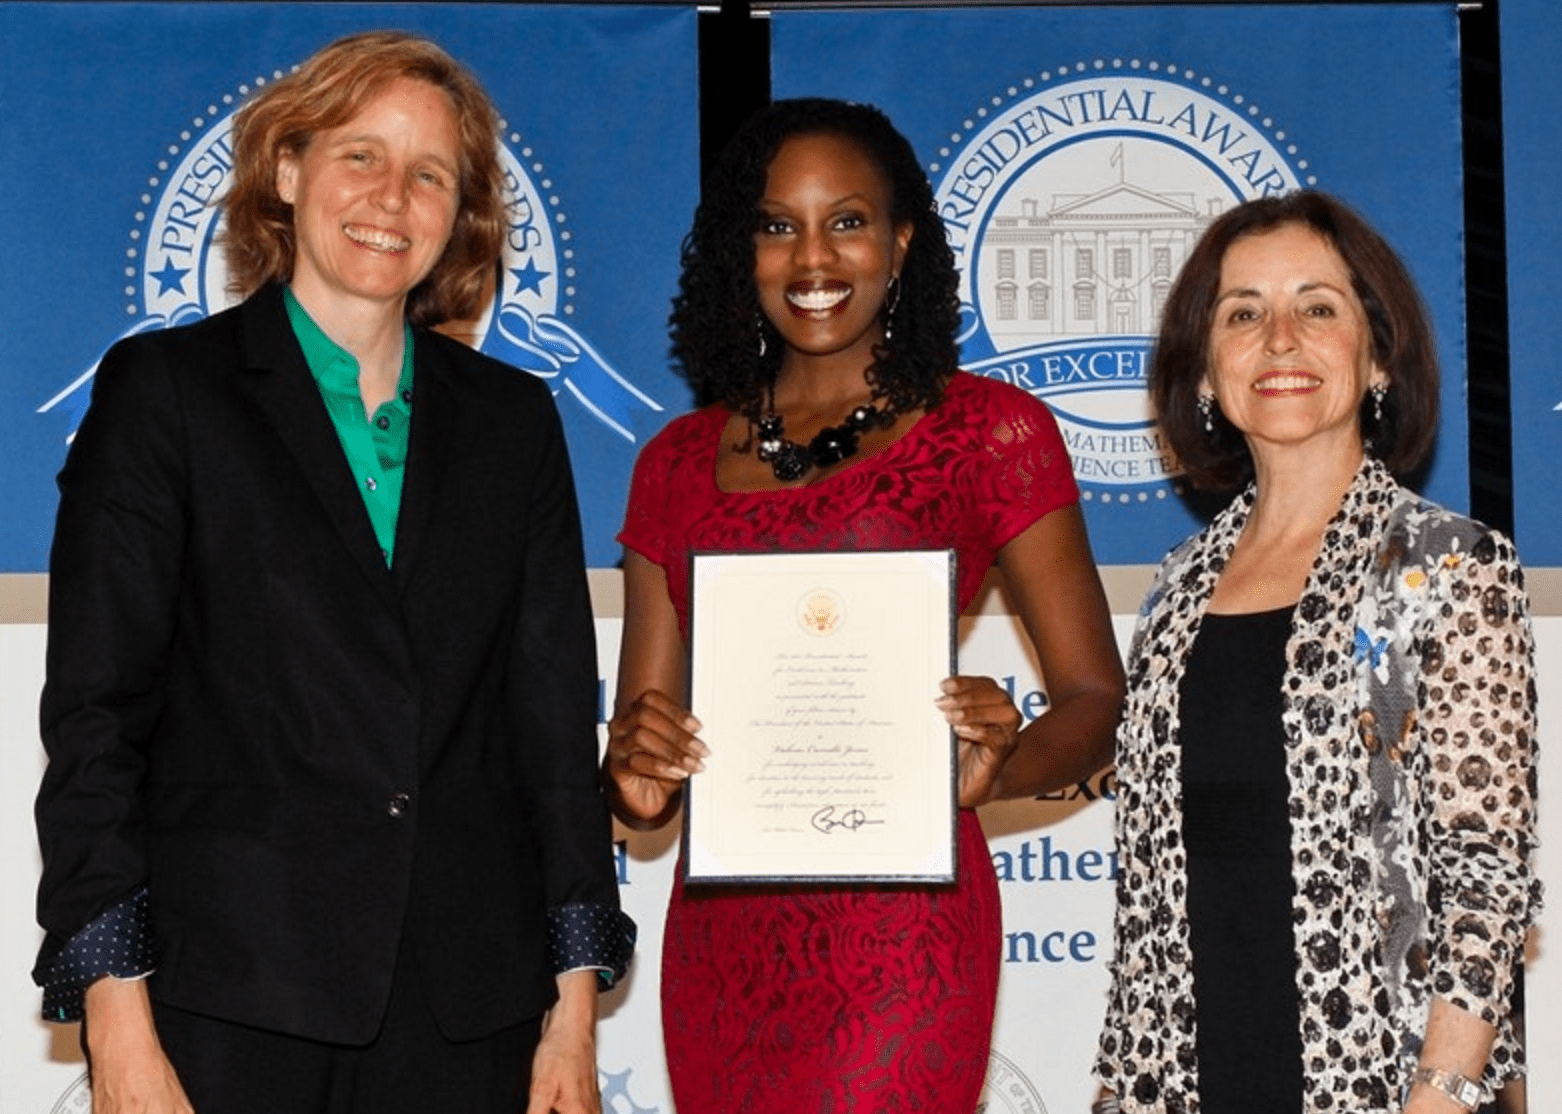 Dr. Valerie Camille Jones holding her Presidential Award for Excellence in Mathematics and Science Teaching certificate between Megan Smith, U.S. Chief Technology Officer and Director of the National Science Foundation, Dr. France A. Còrdova.